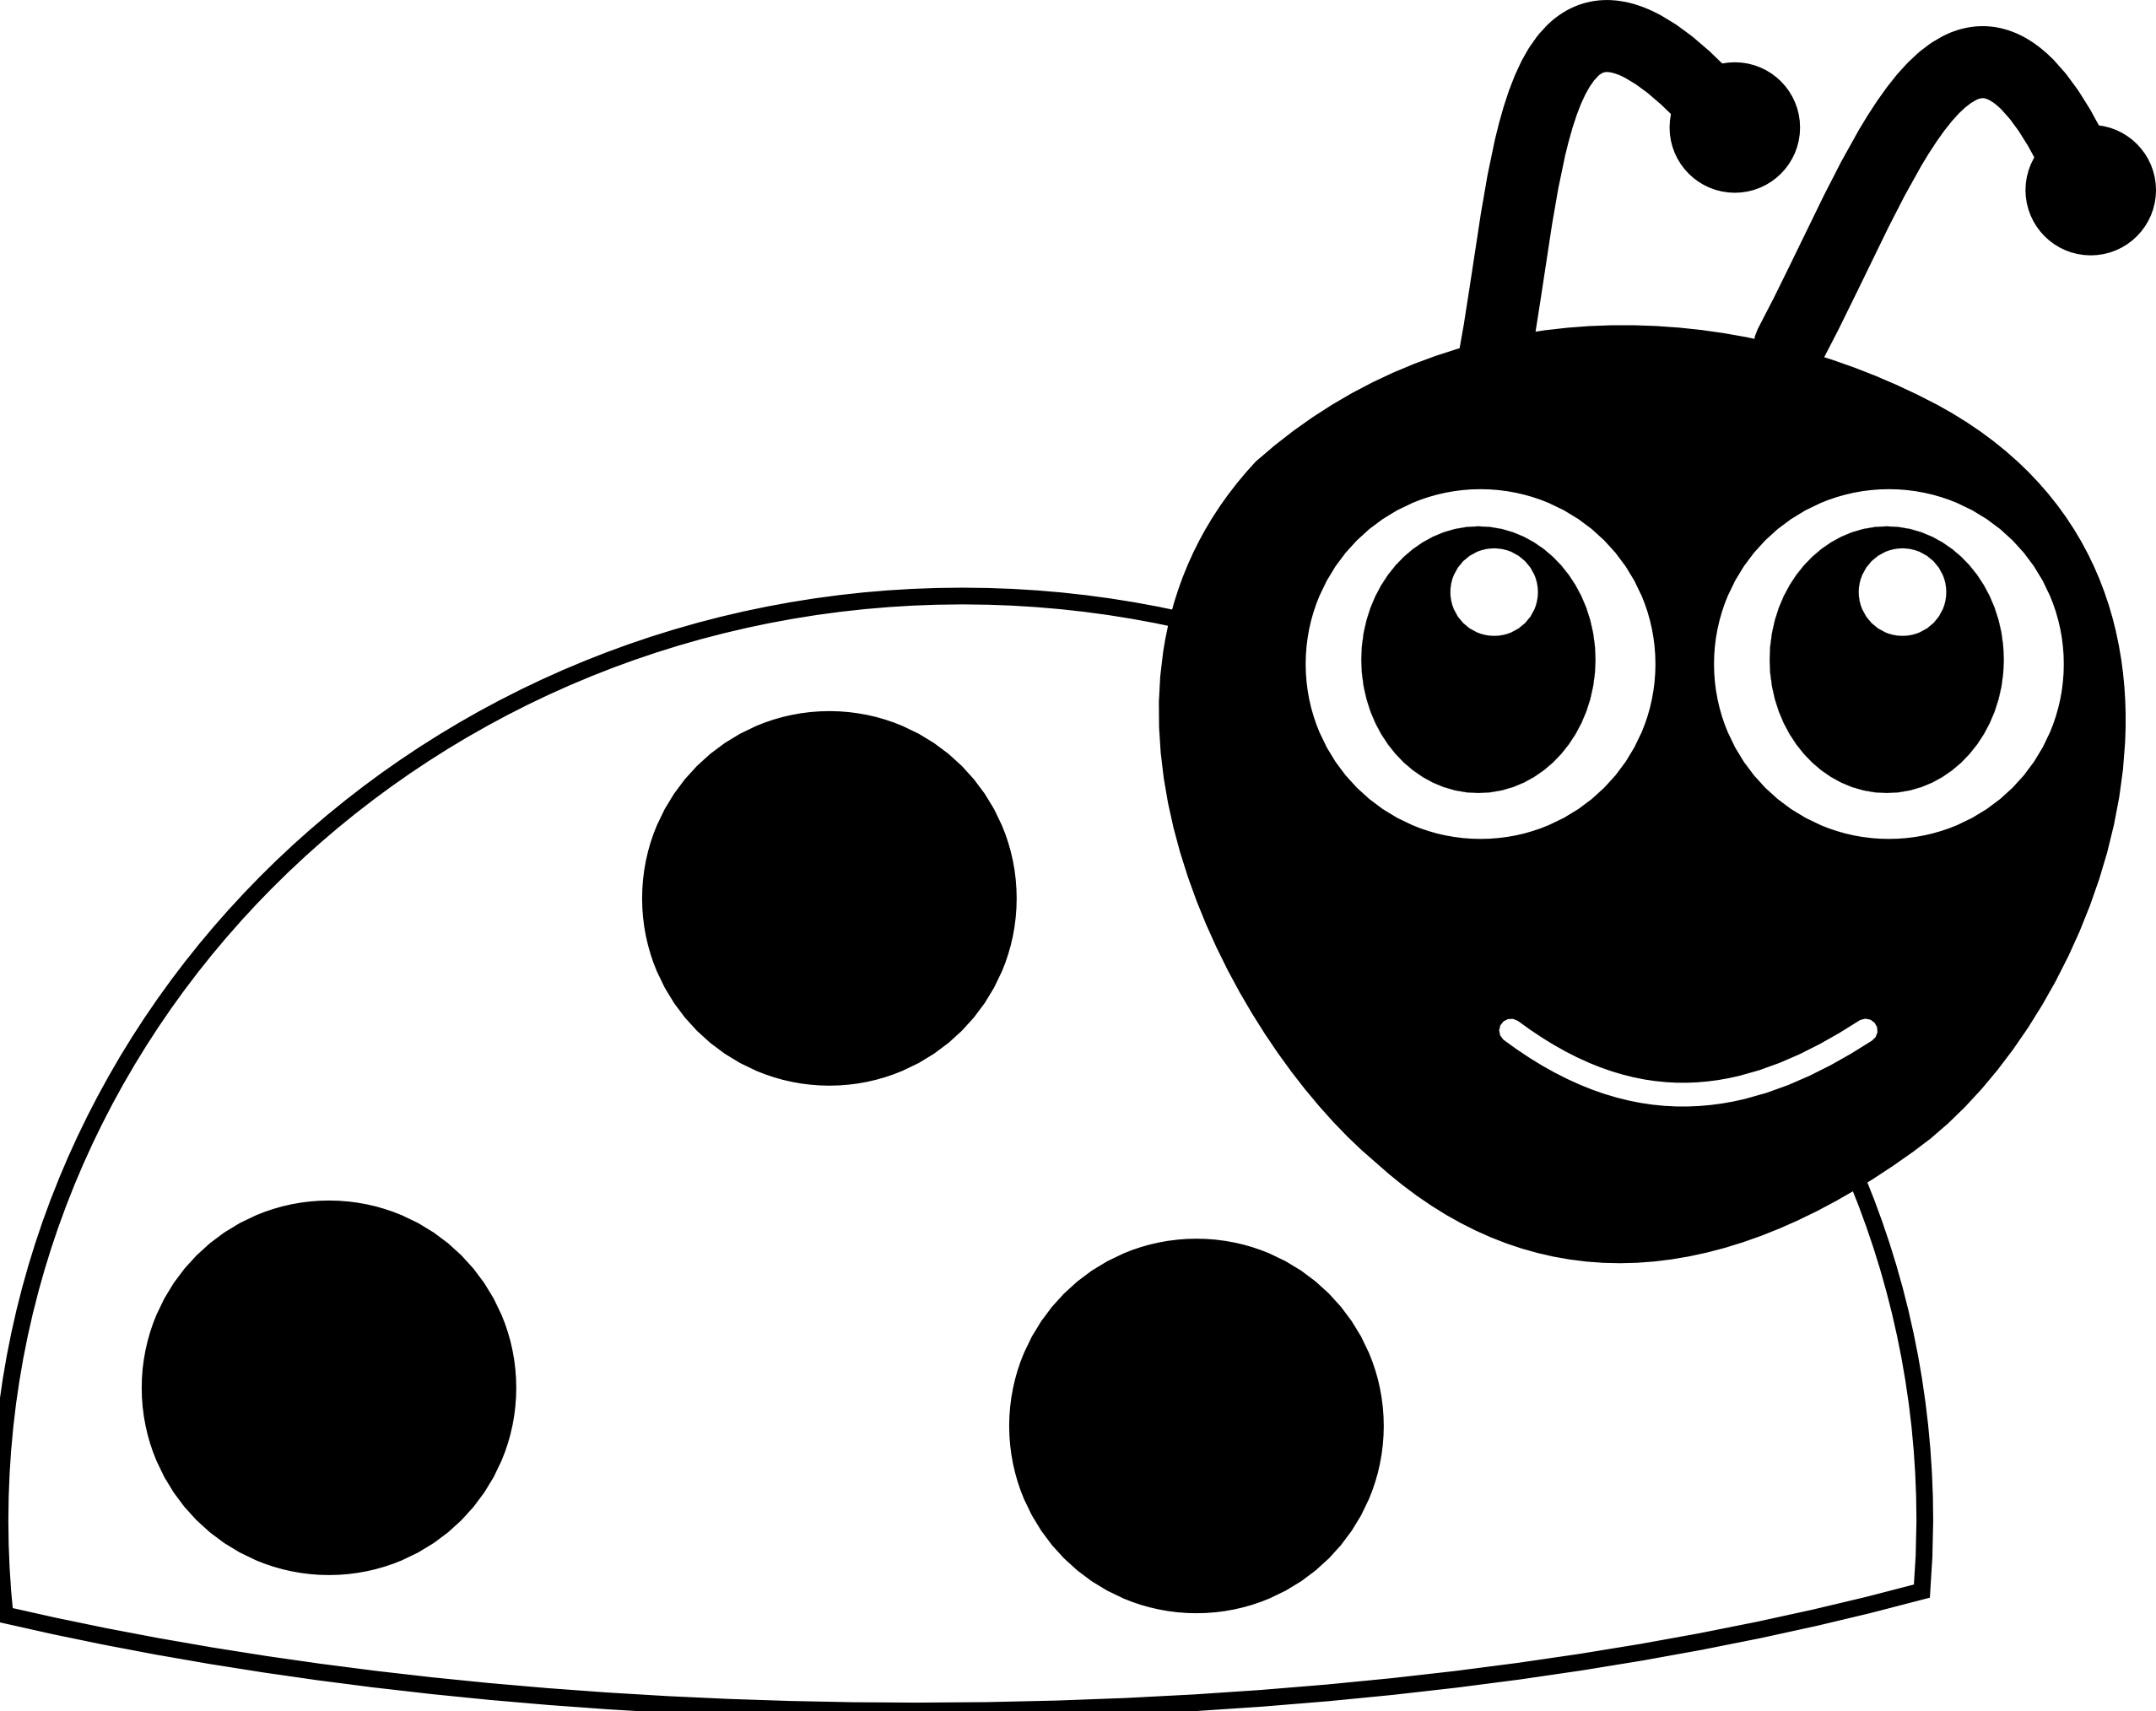 Peas clipart template. Beetle black and white